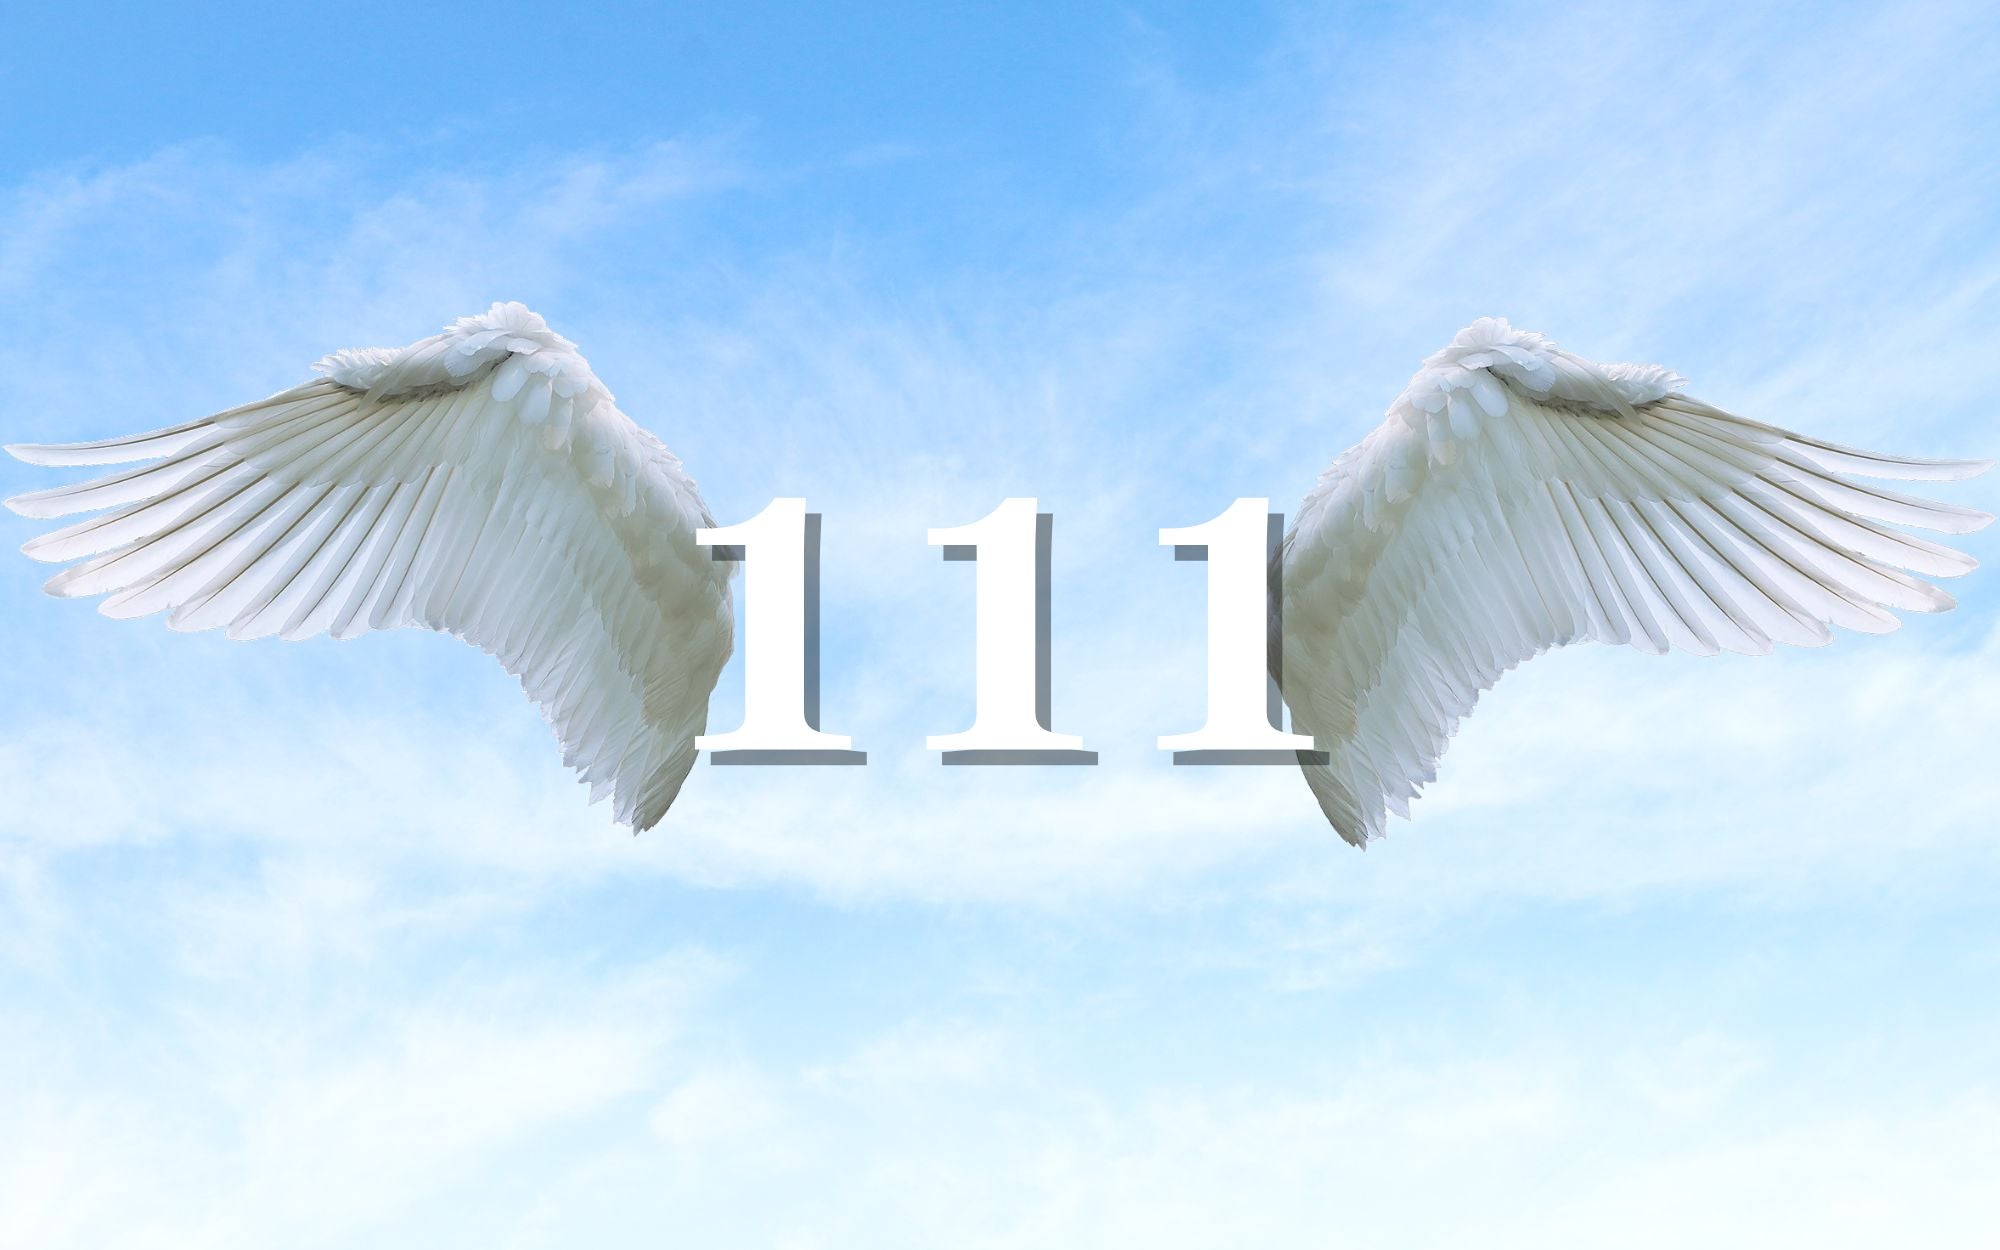 angel numbers meaning - 111